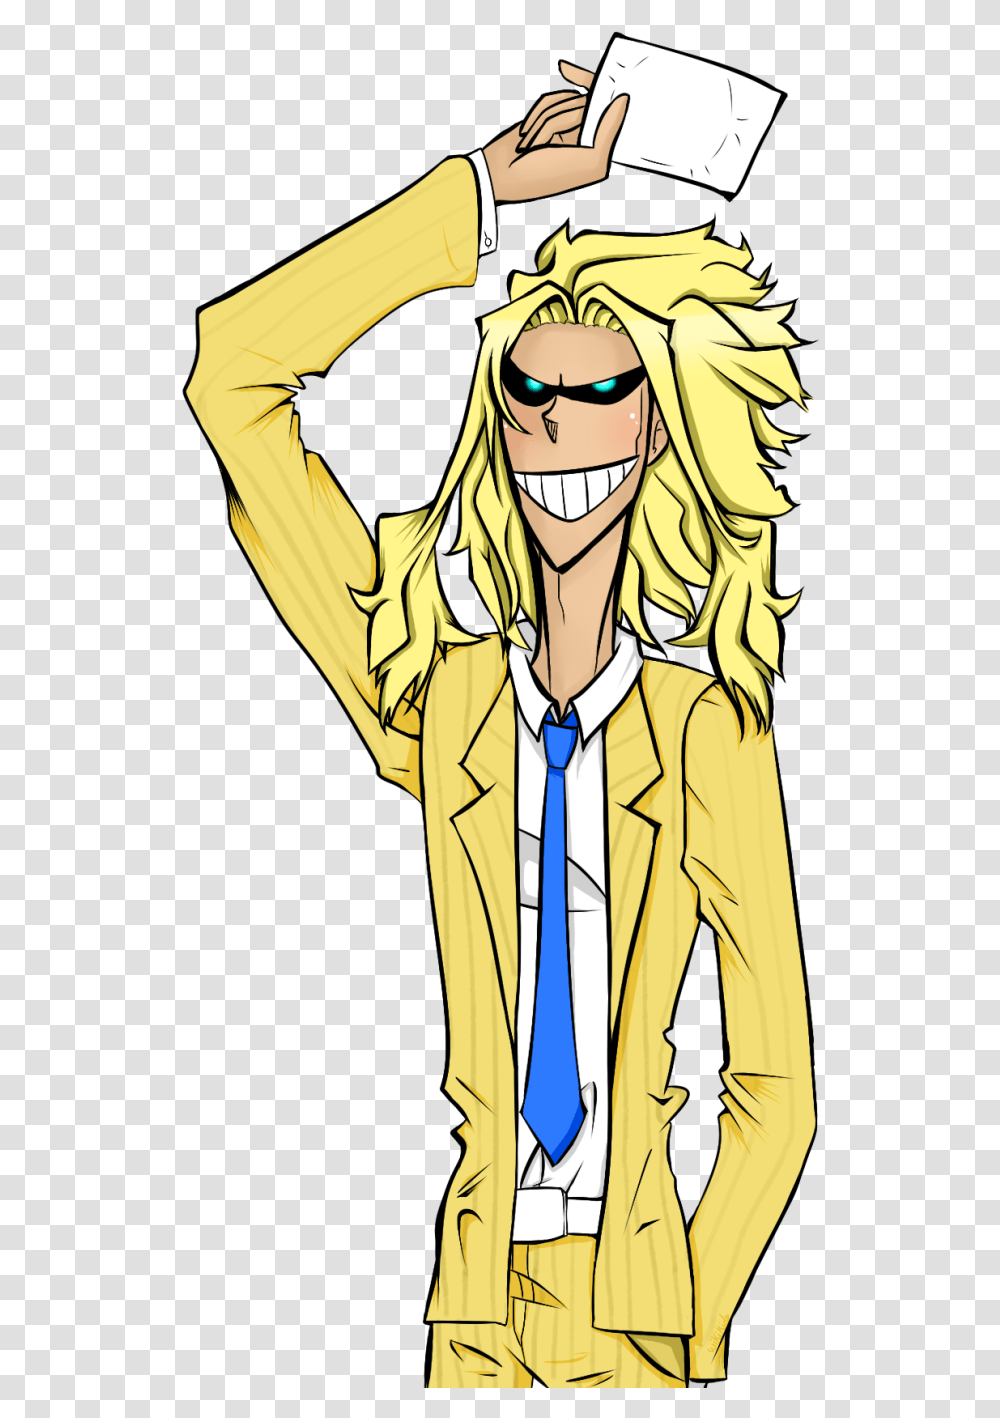 Toshinori Yagiall Might Media All Might, Tie, Accessories, Accessory, Sunglasses Transparent Png